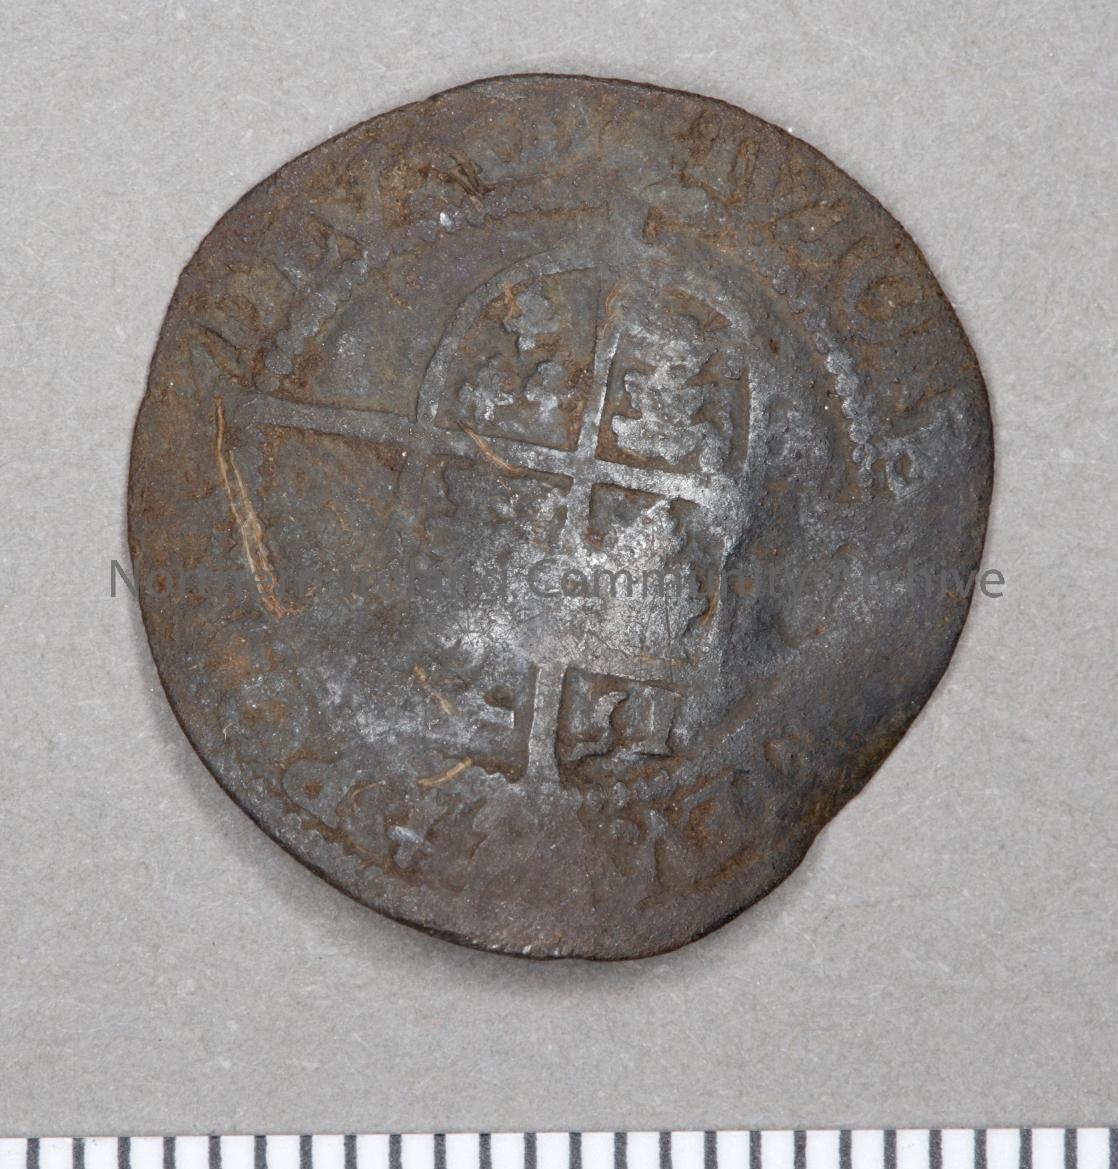 Coin found during the excavation of Dunluce Town